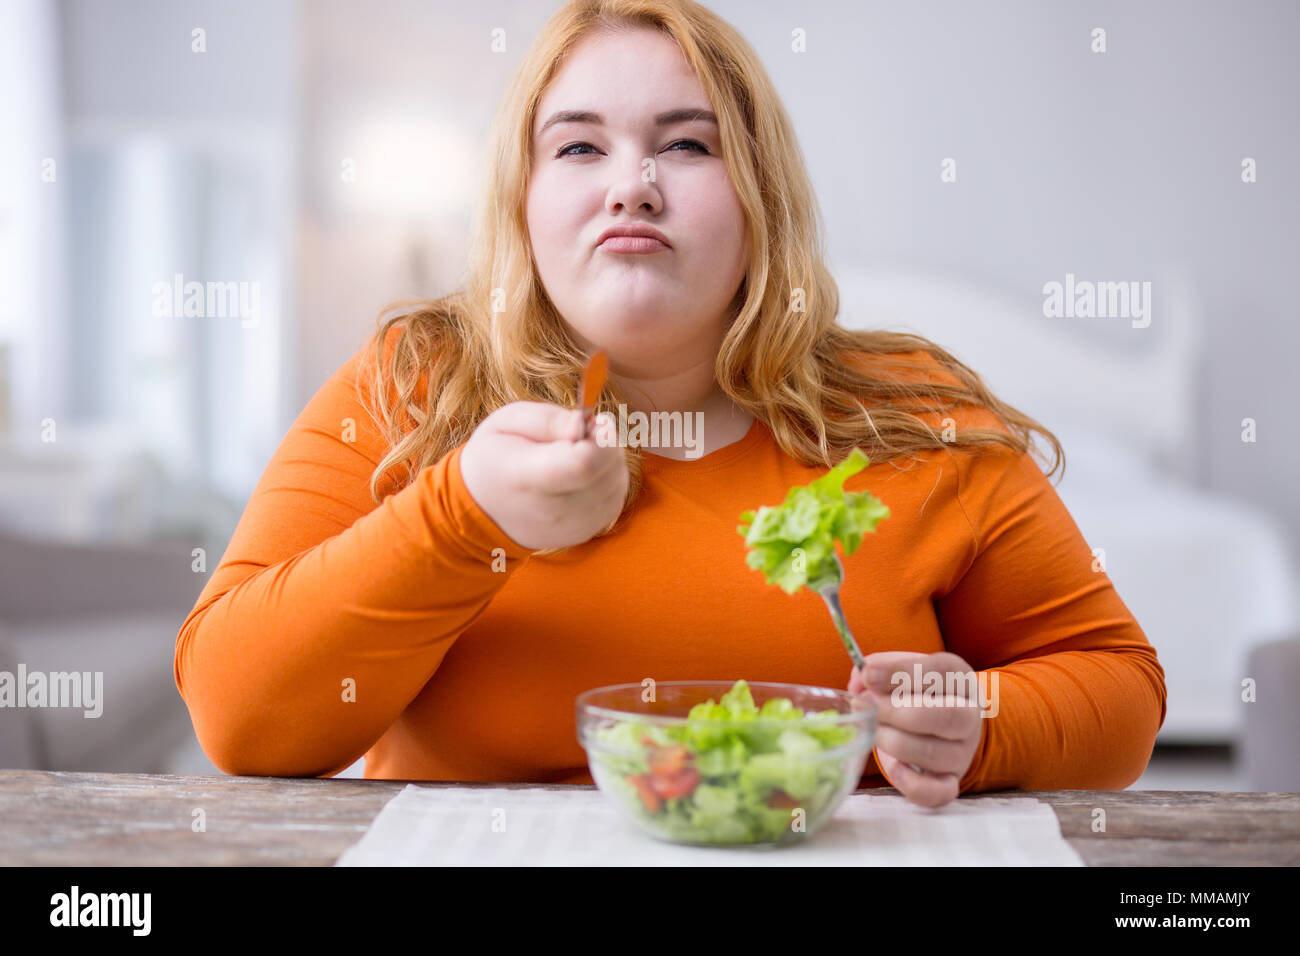 Determined fat woman eating healthy breakfast Stock Photo